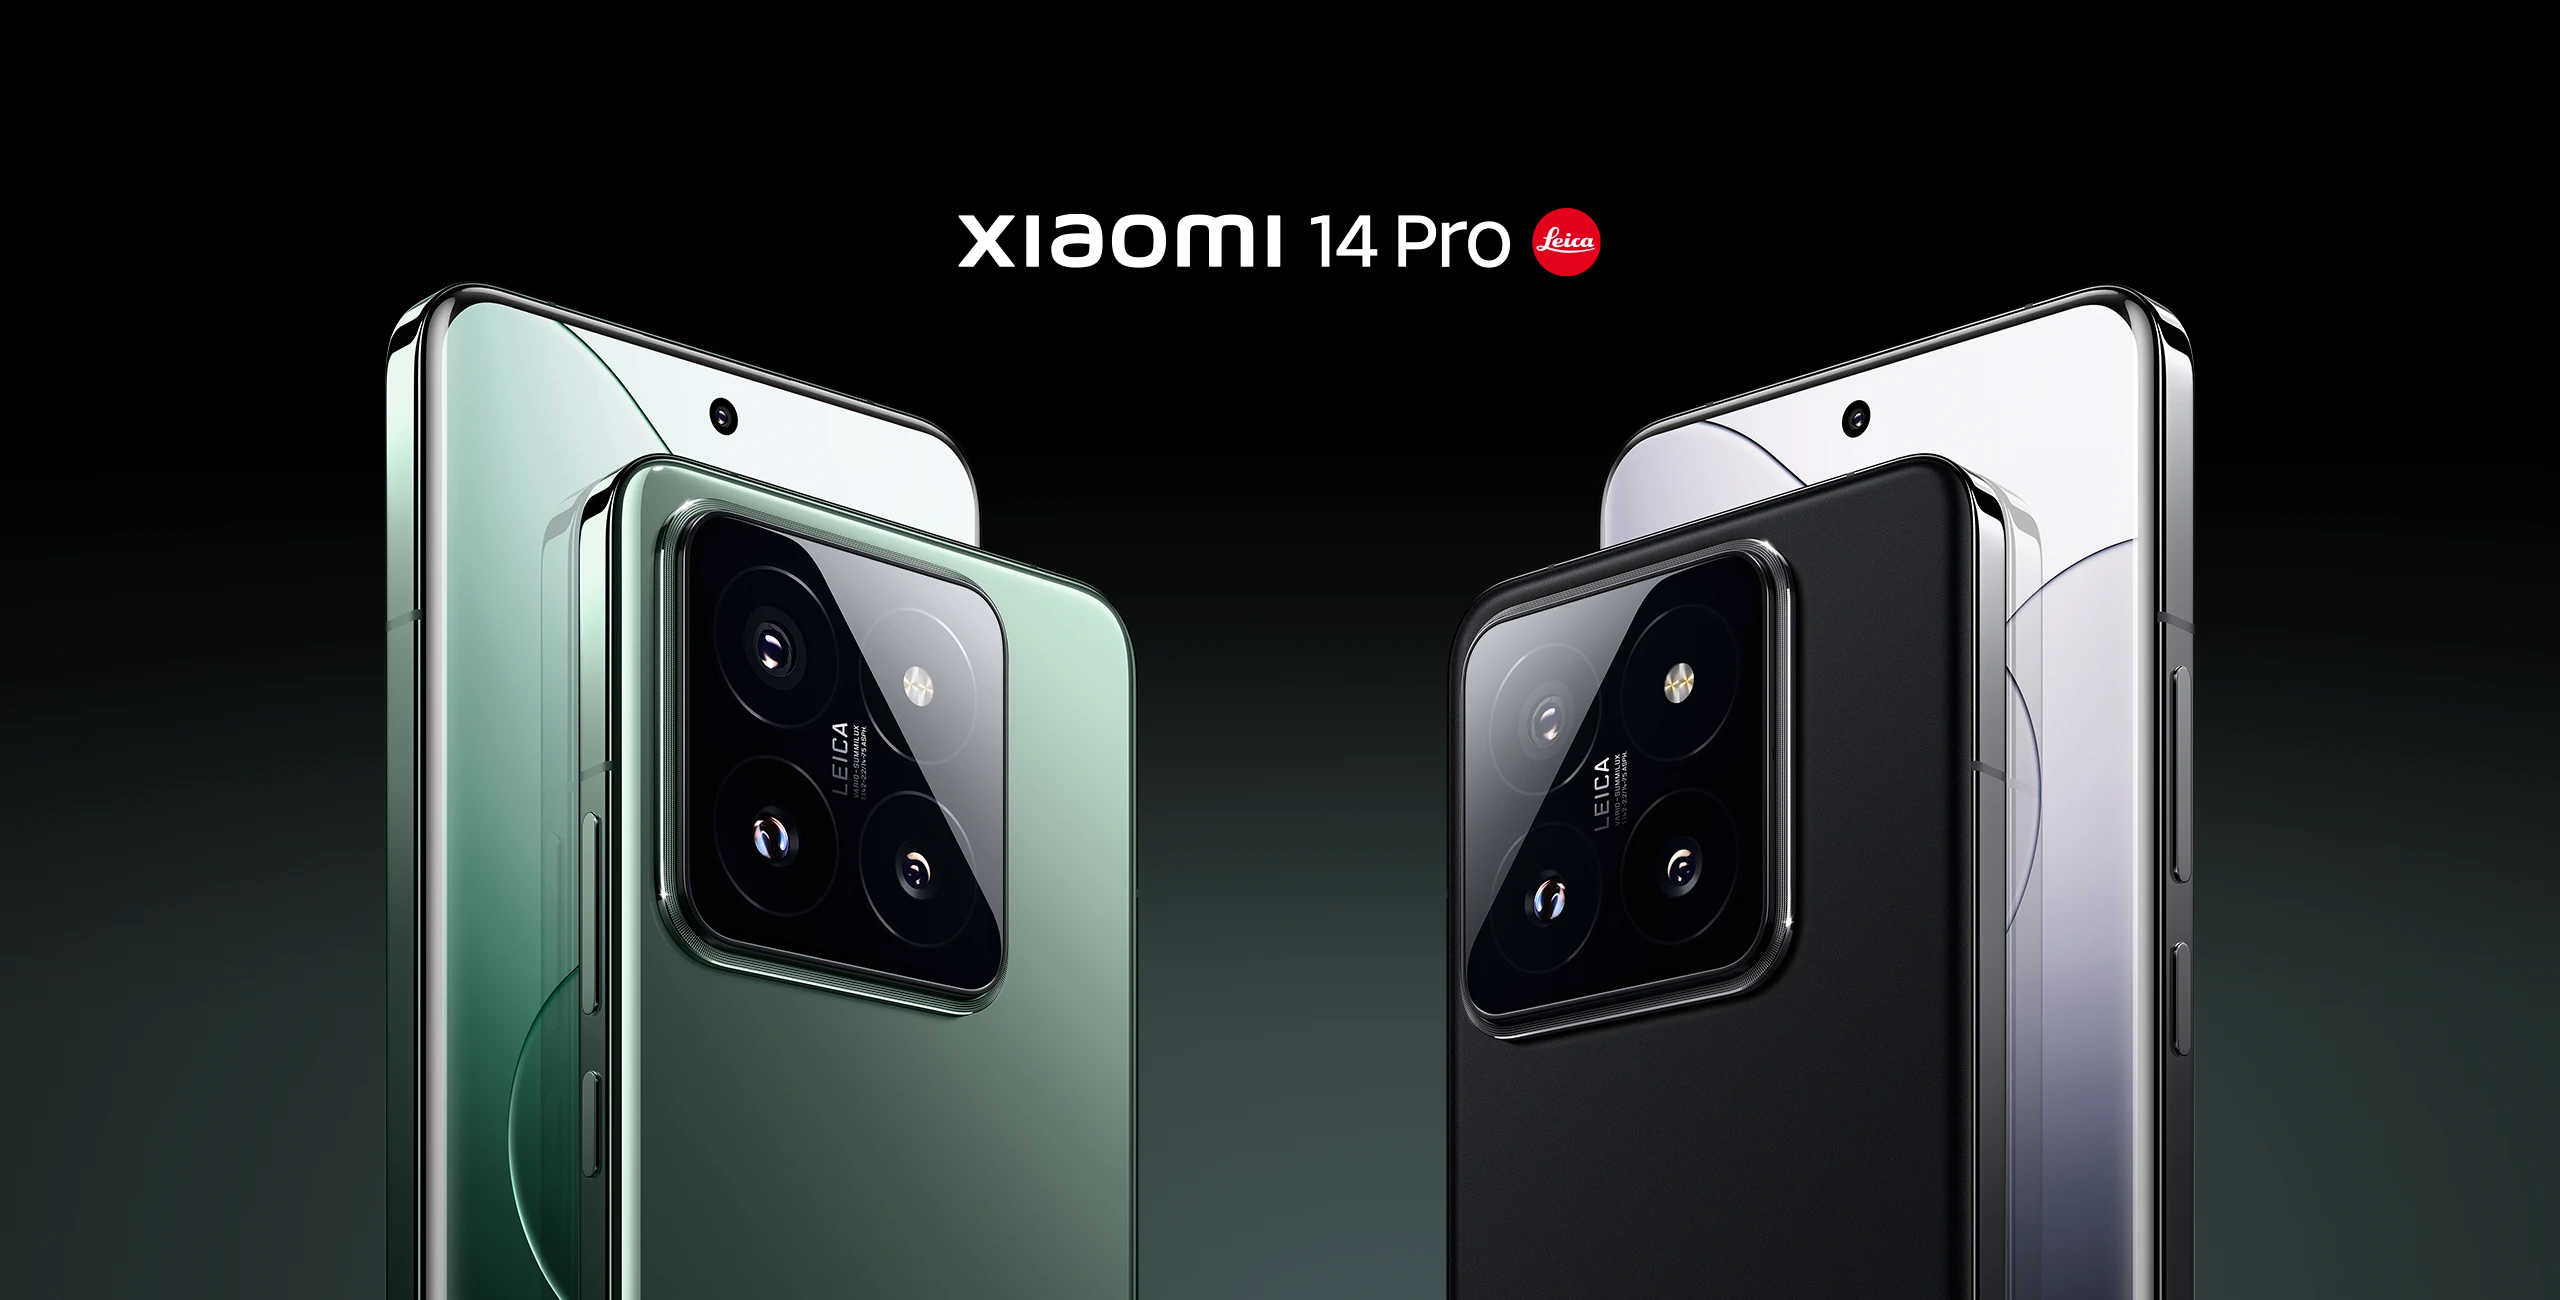 Xiaomi 14 Pro: A flagship with game-changing operating system with enhanced features